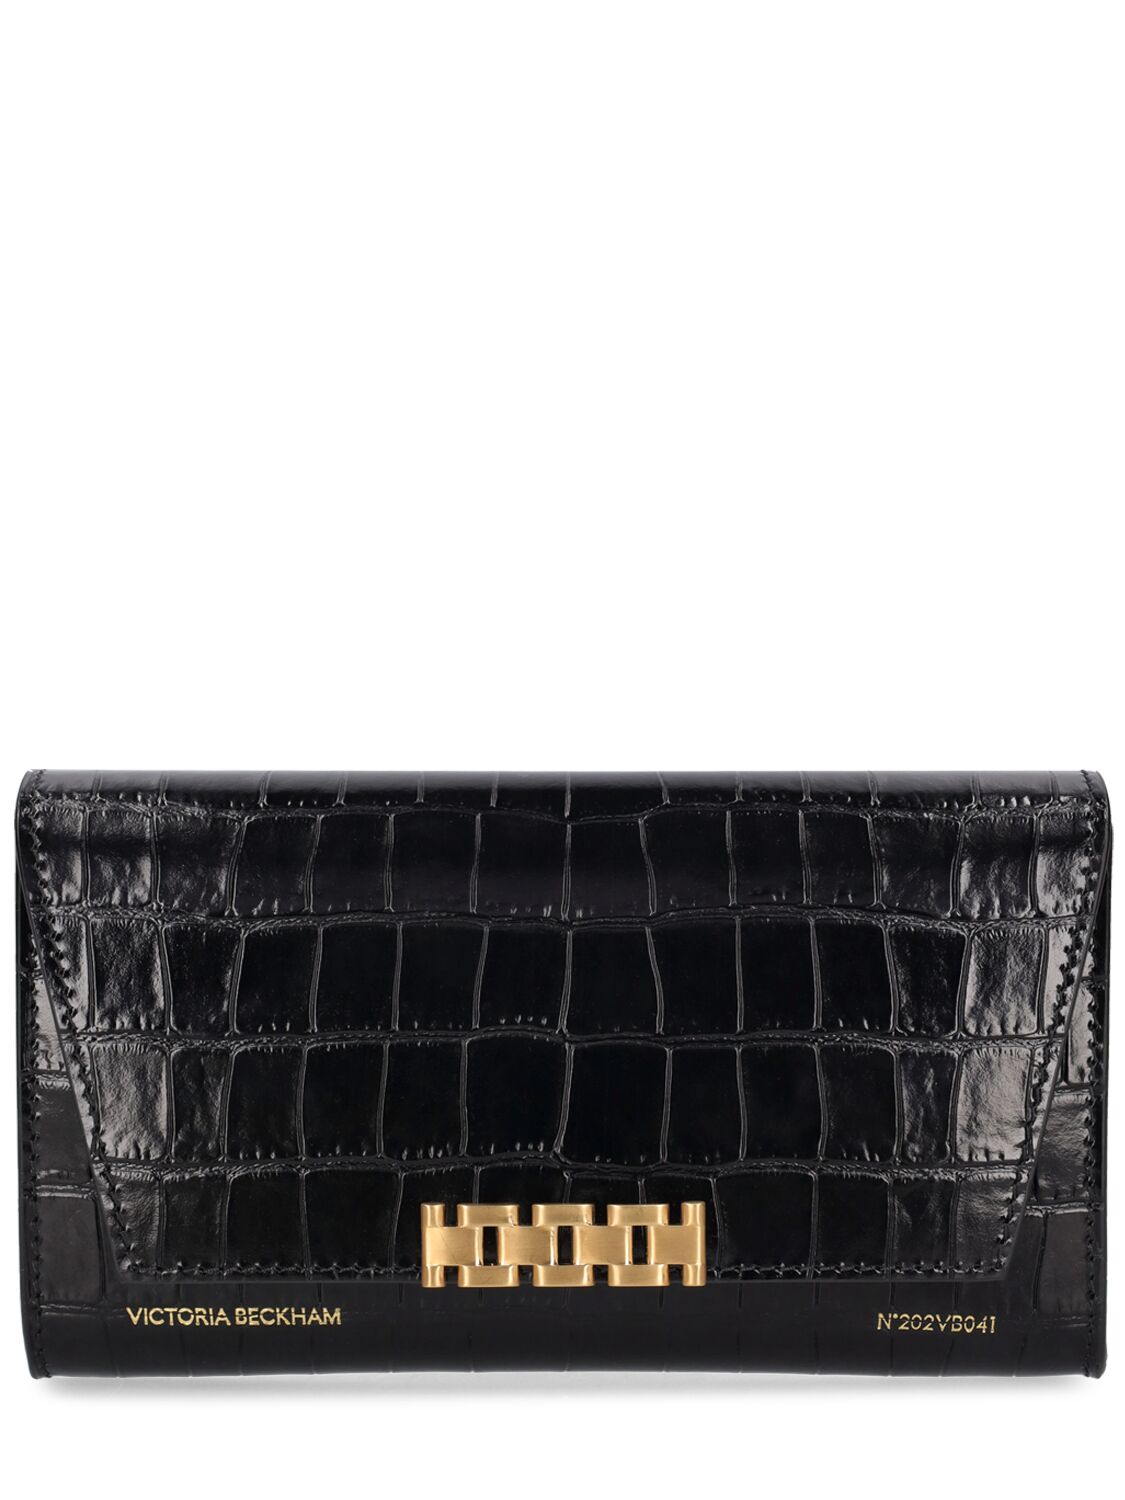 Victoria Beckham Embossed Leather Wallet W/ Chain In Black